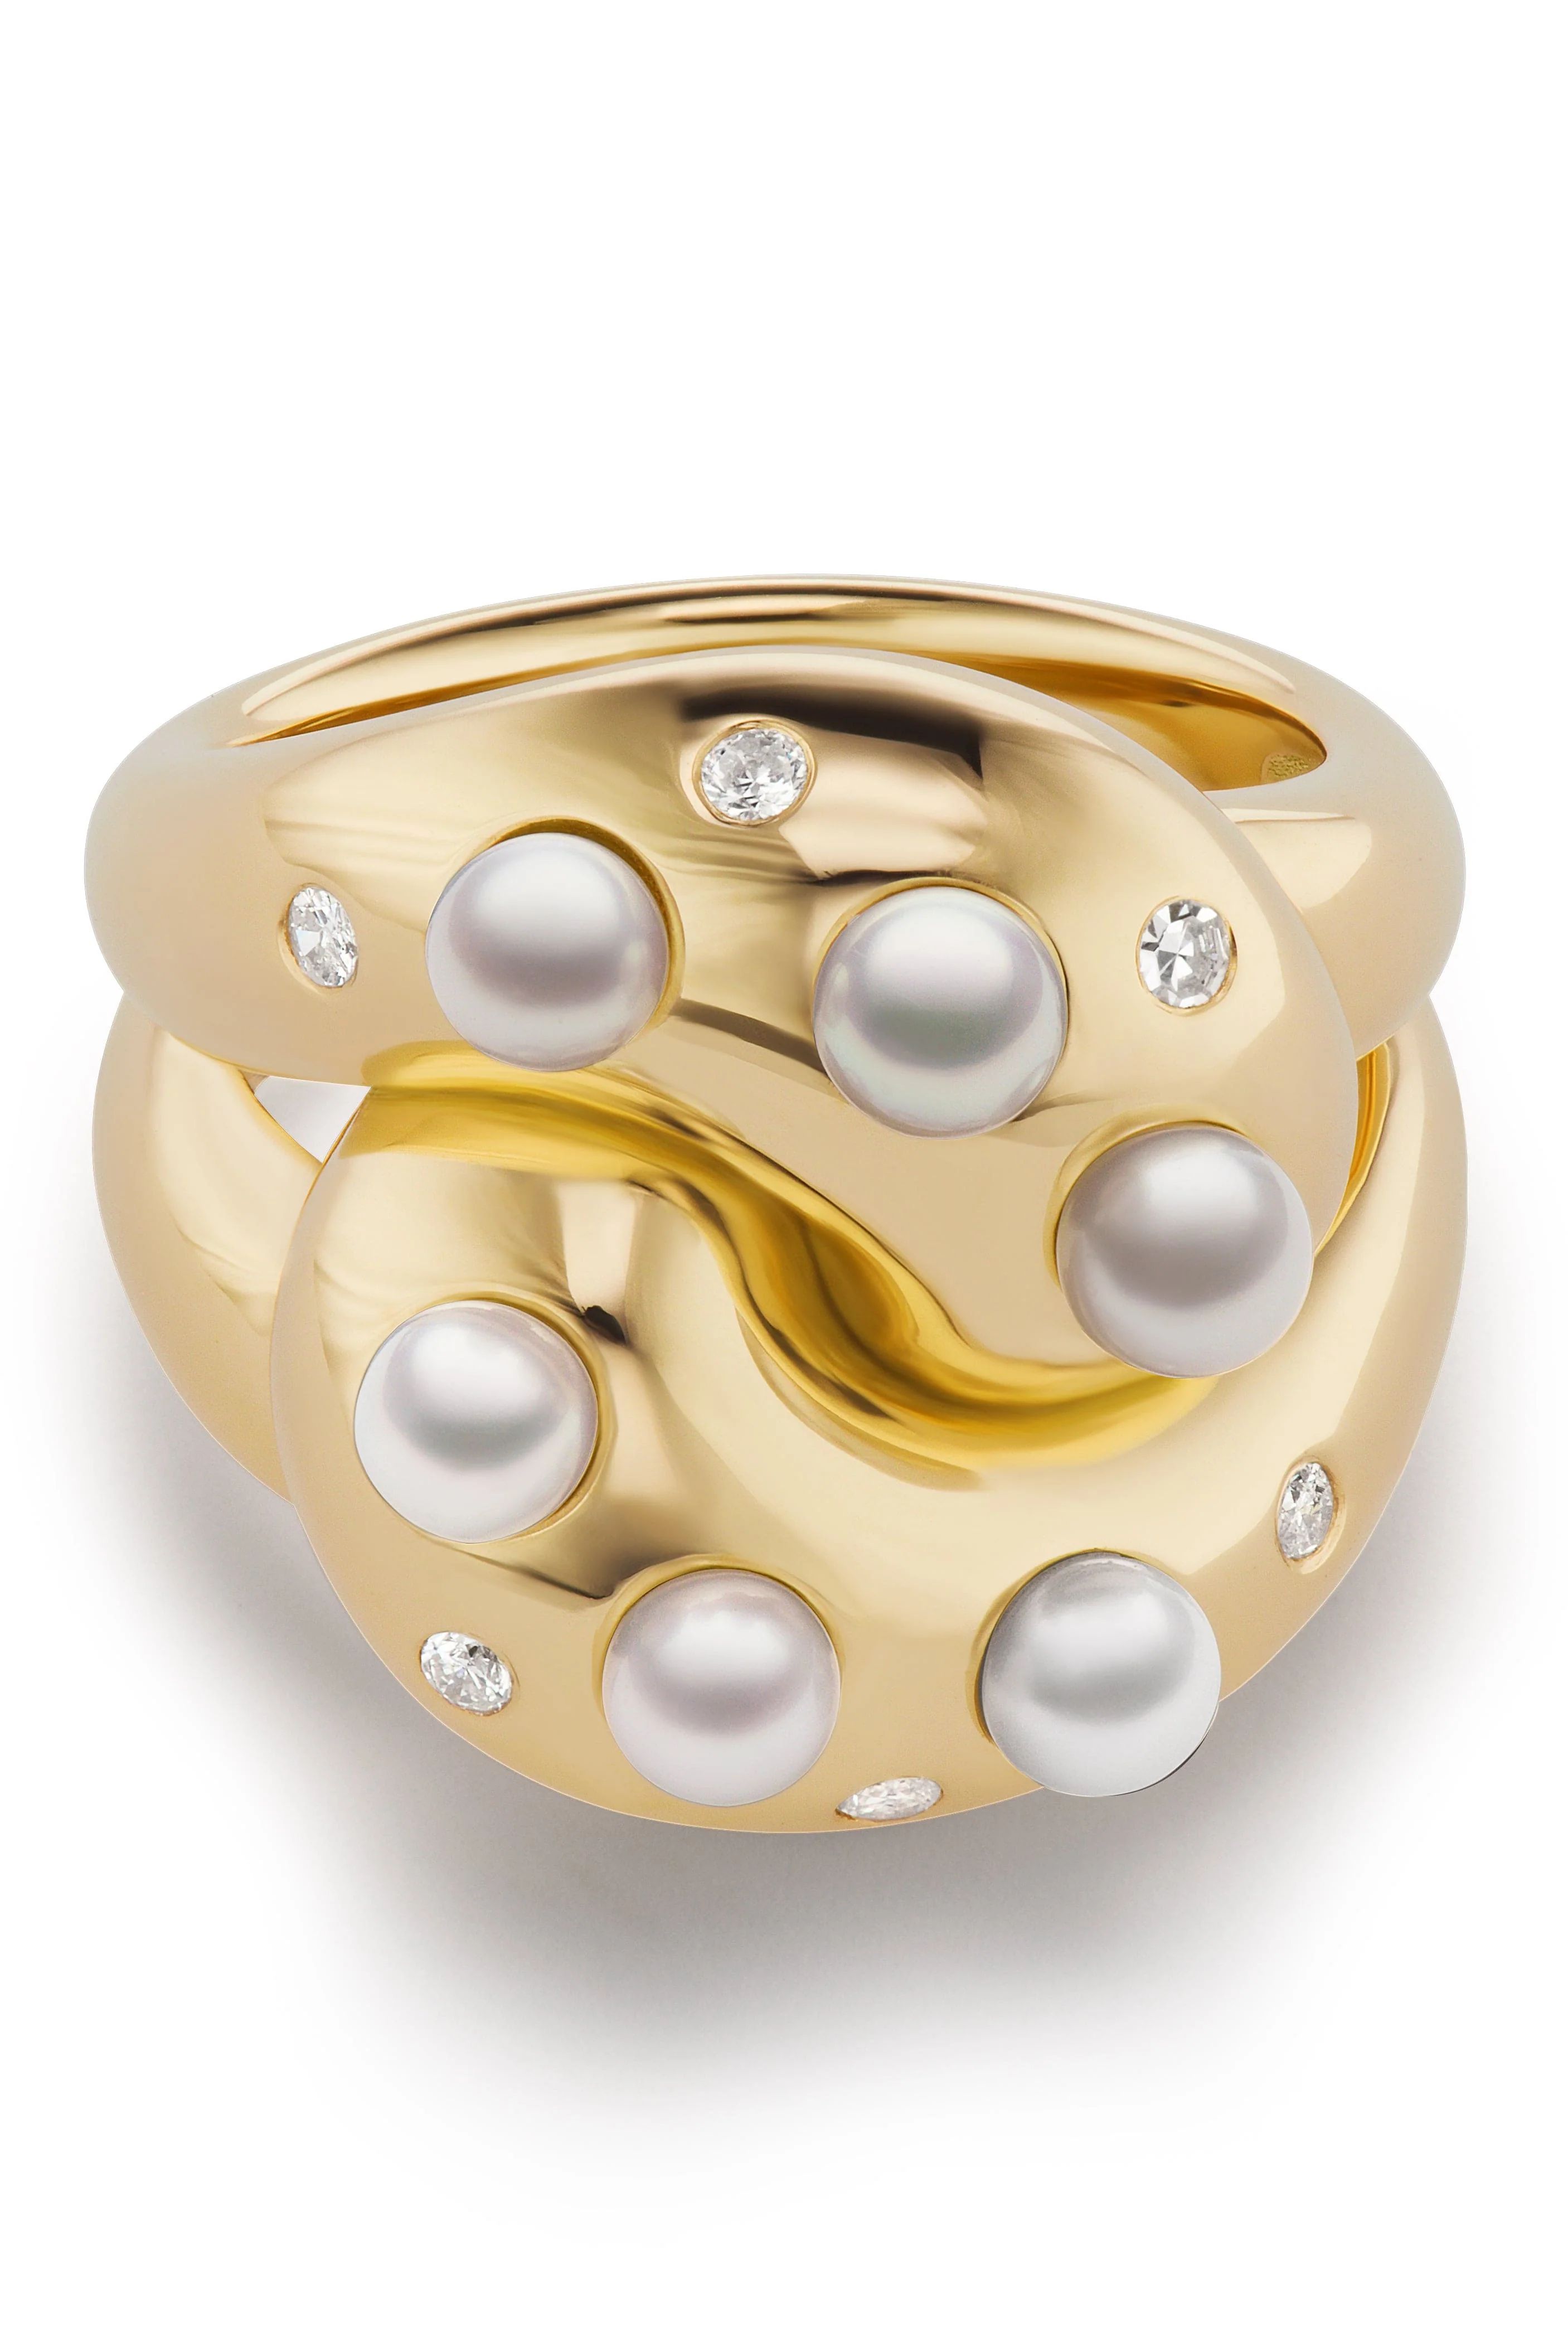 Pearl and Diamond Knot Ring | Marissa Collections